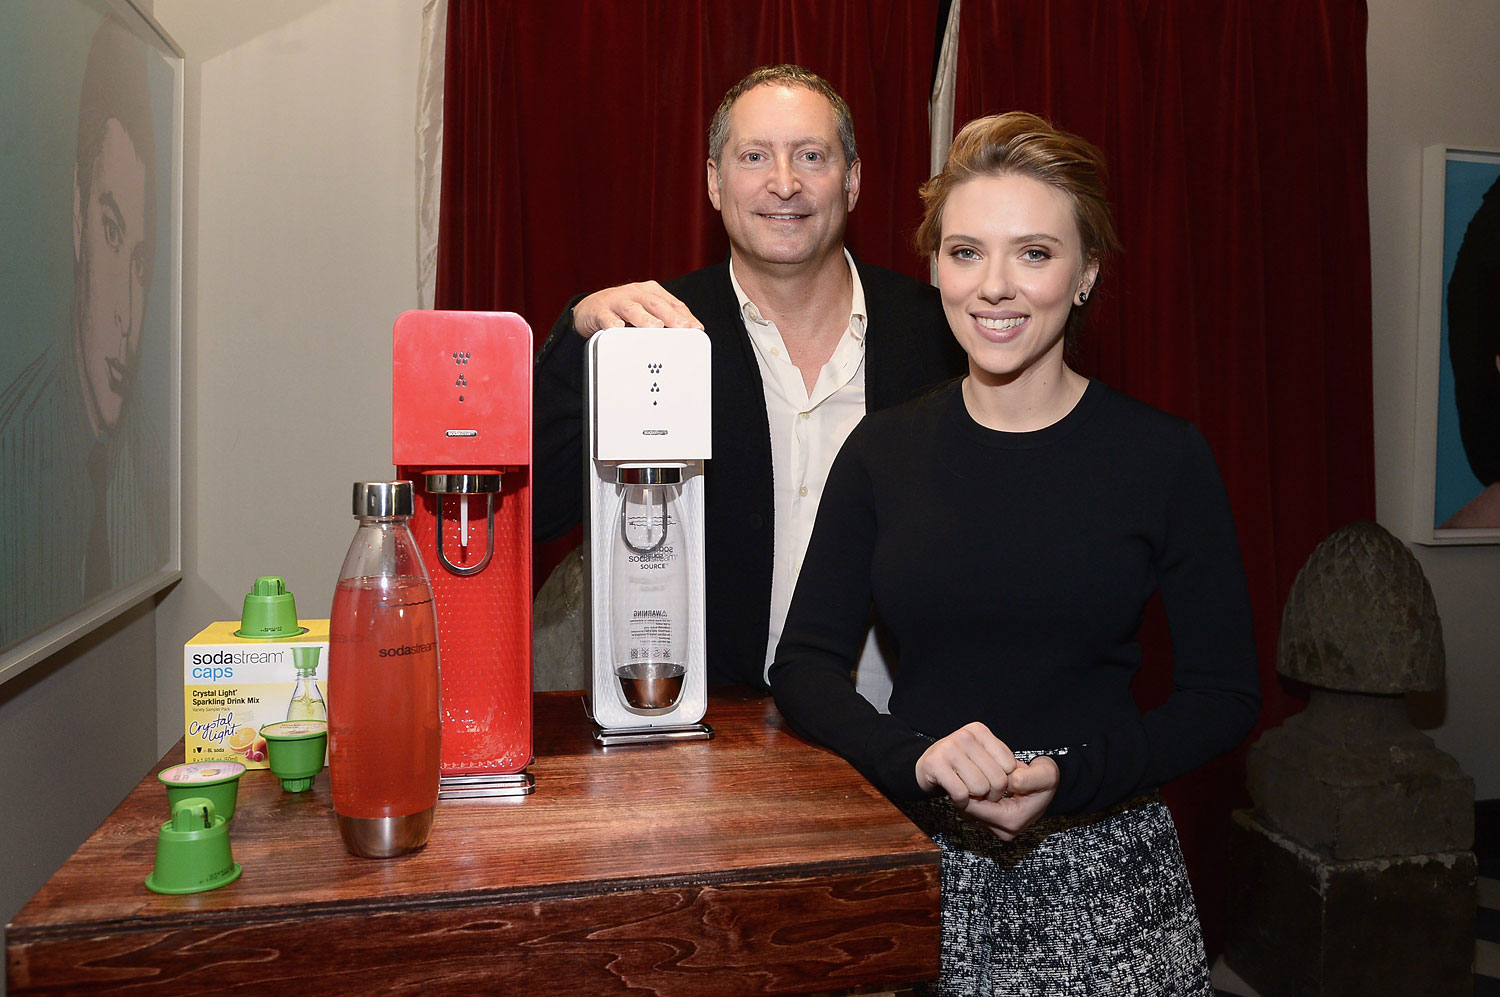 SodaStream unveiled Scarlett Johansson as its first-ever Global Brand Ambassador on Jan. 10, 2014 in New York. (Mike Coppola / Getty Images)